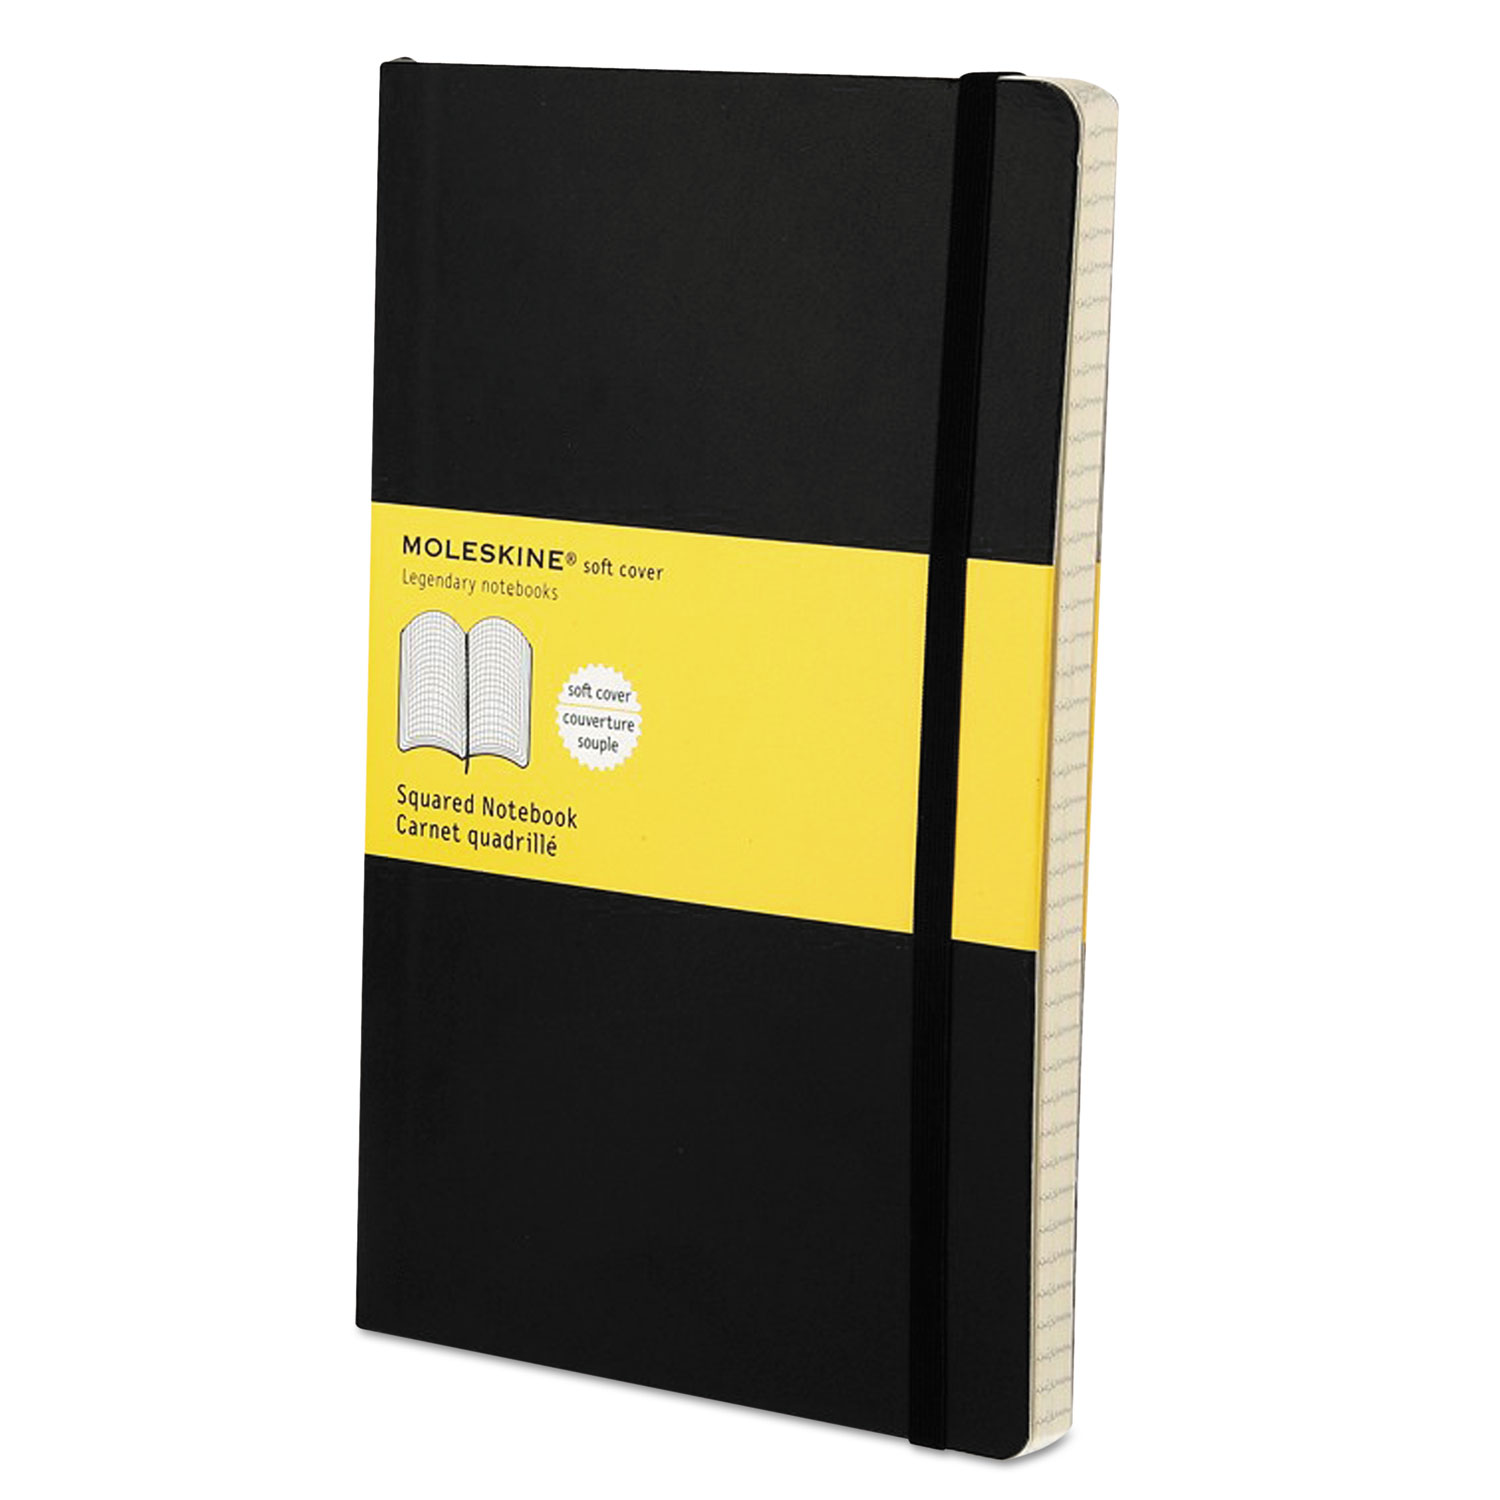  Moleskine 9788883707186 Classic Softcover Notebook, 1 Subject, Quadrille Rule, Black Cover, 8.25 x 5, 192 Sheets (HBGMSL15) 